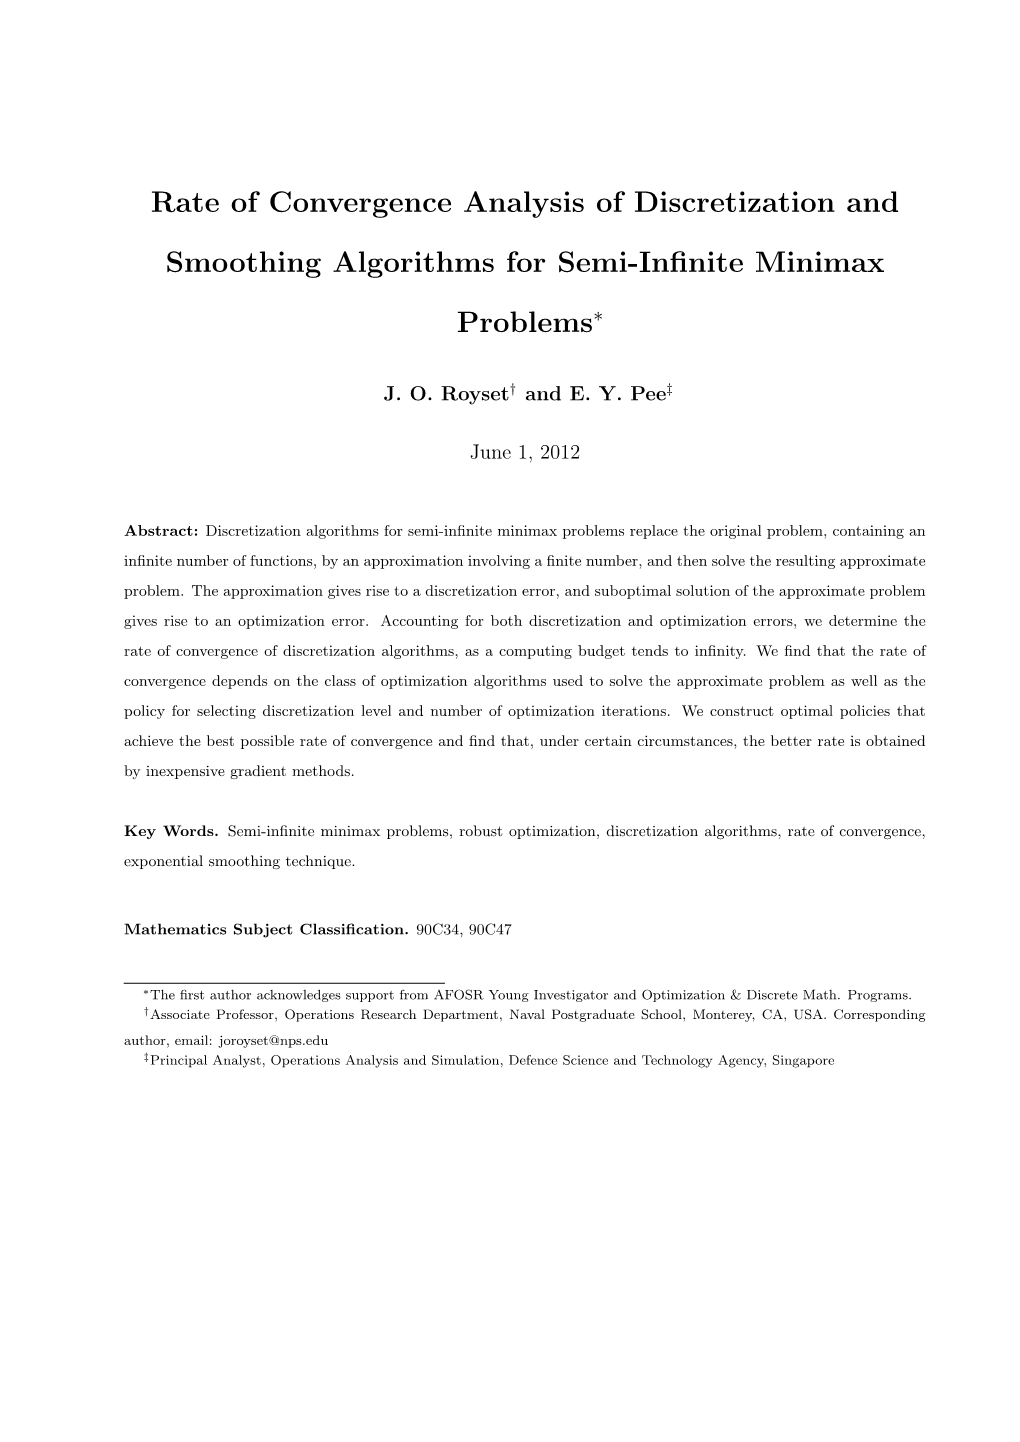 Rate of Convergence Analysis of Discretization and Smoothing Algorithms for Semi-Infinite Minimax Problems